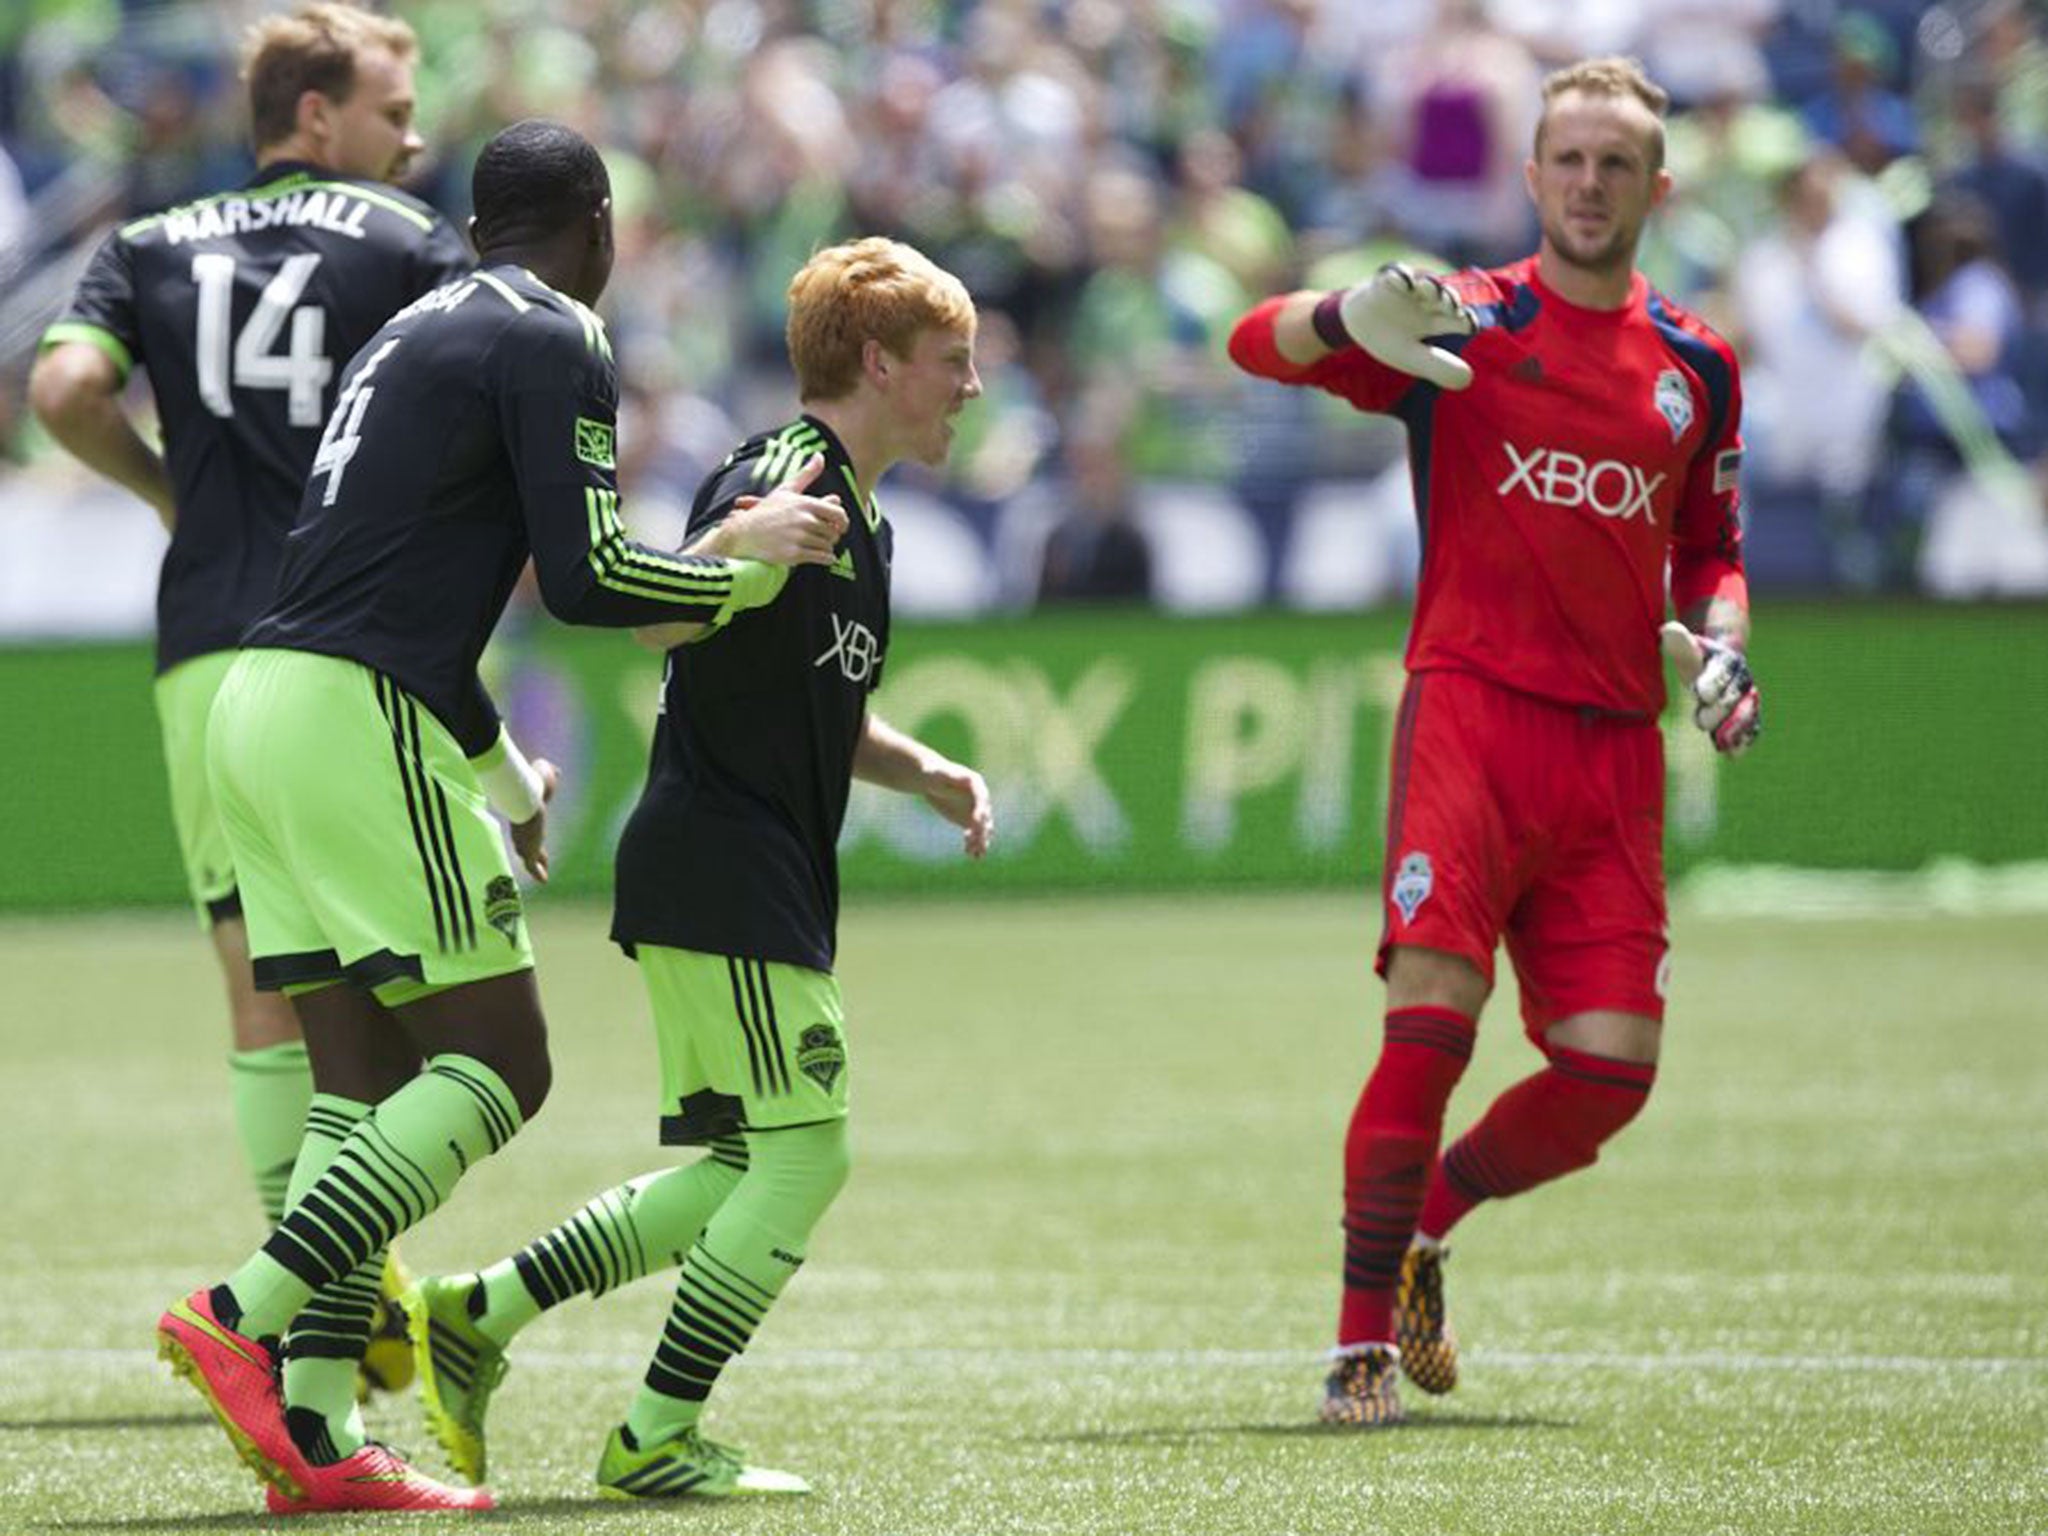 Seattle Sounders' Xander Bailey, second from right, is congratulated by teammates Chad Marshall (14), Jalil Anibaba, second from left, and Stefan Frei after scoring a ceremonial first goal against Tottenham Hotspur